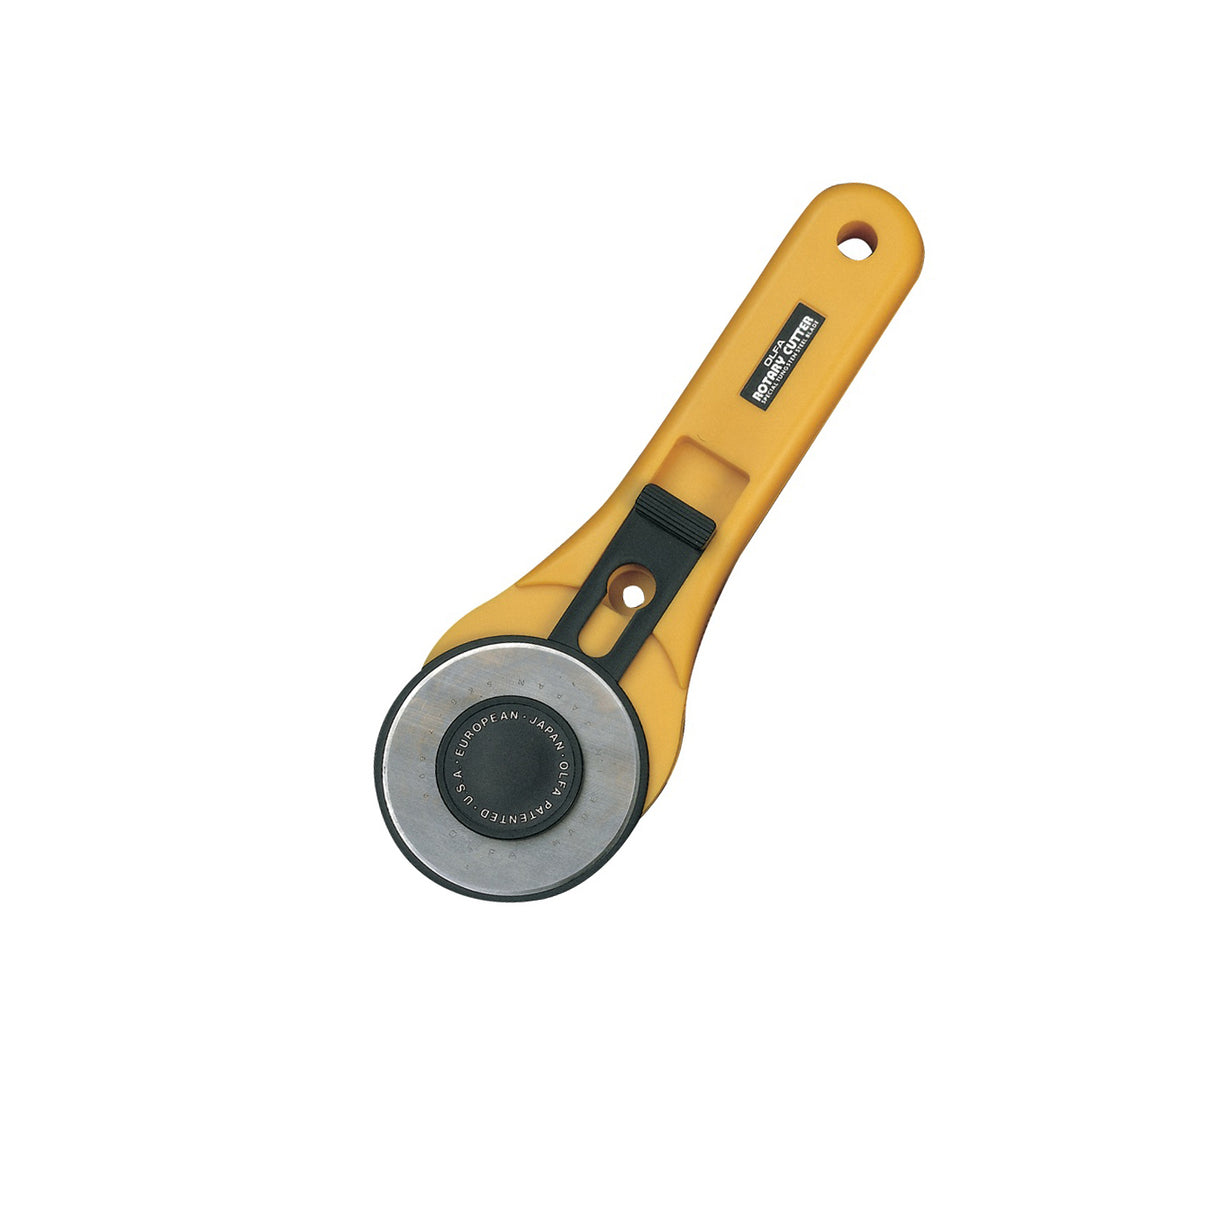 Rotary Cutter, 60 mm